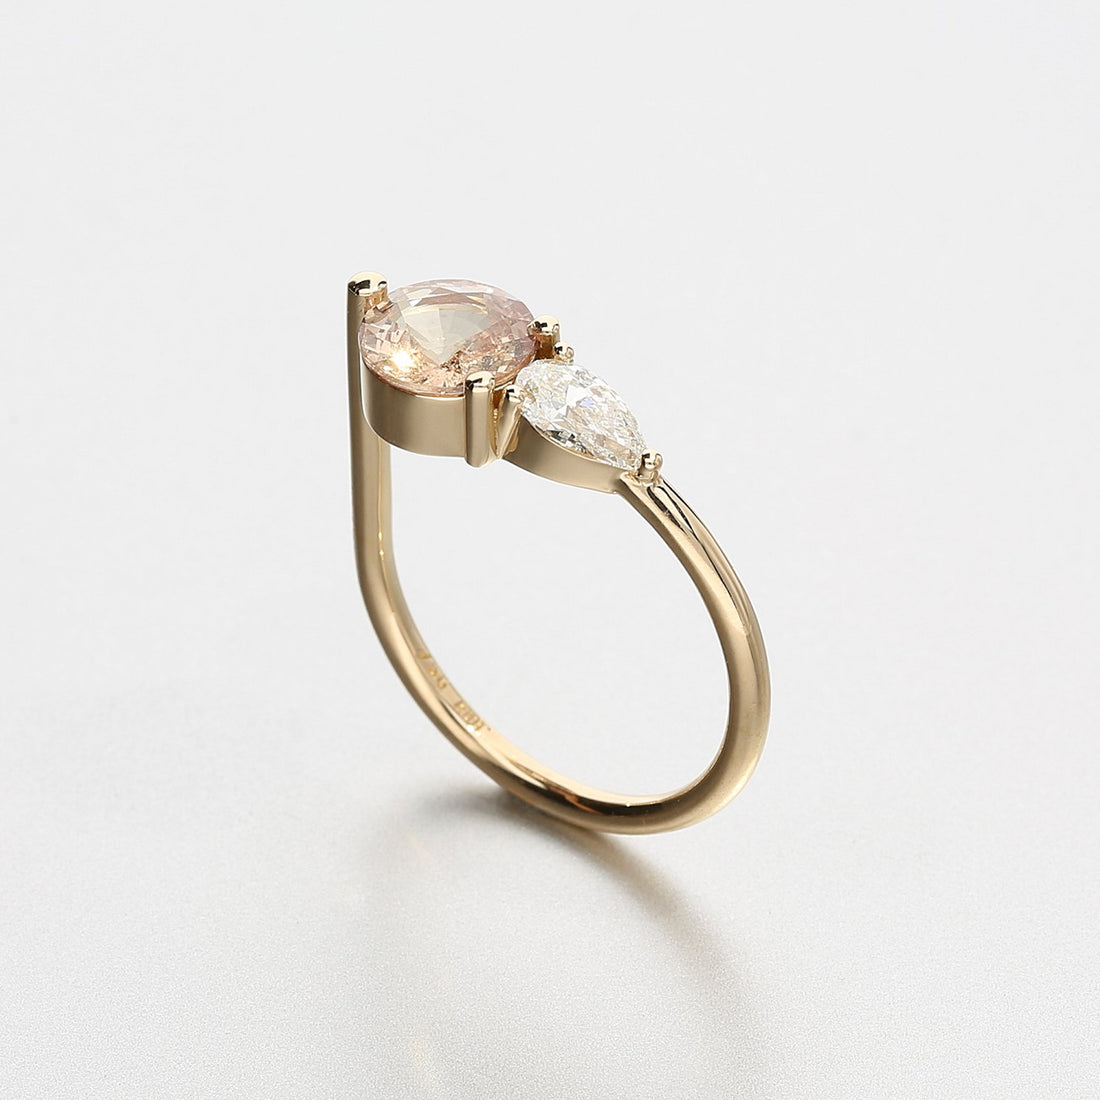  Pink Sapphire and white diamond Ada Ring by Ruberg | The Cut London